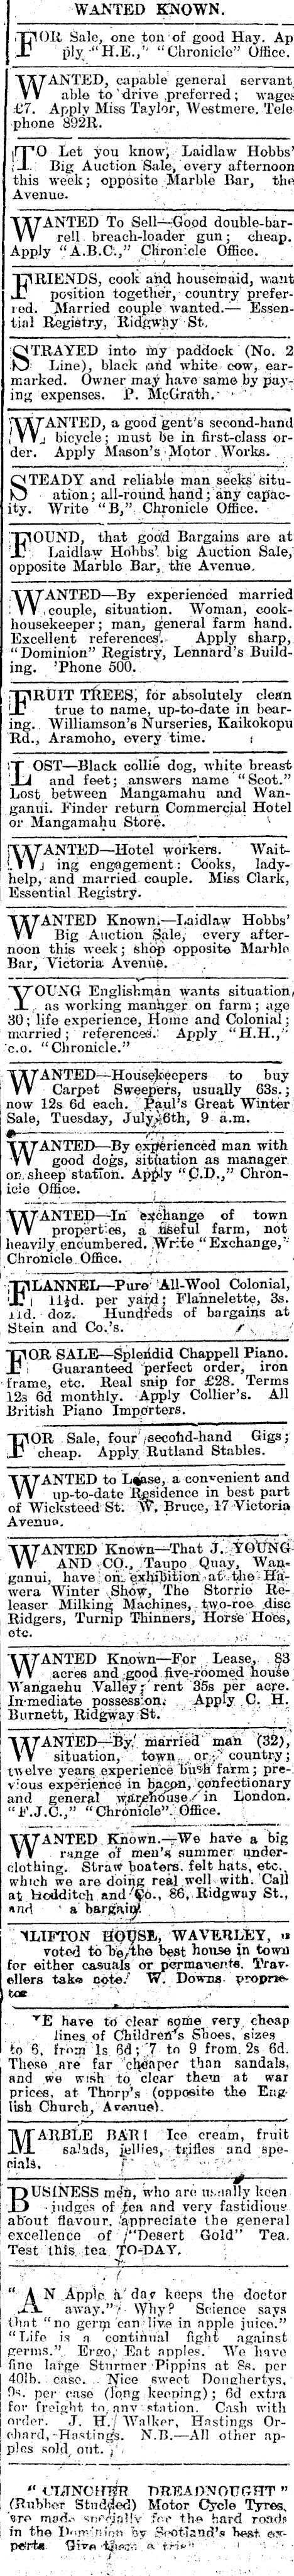 Papers Past Newspapers Wanganui Chronicle 5 July 1915 Page 1 Advertisements Column 4